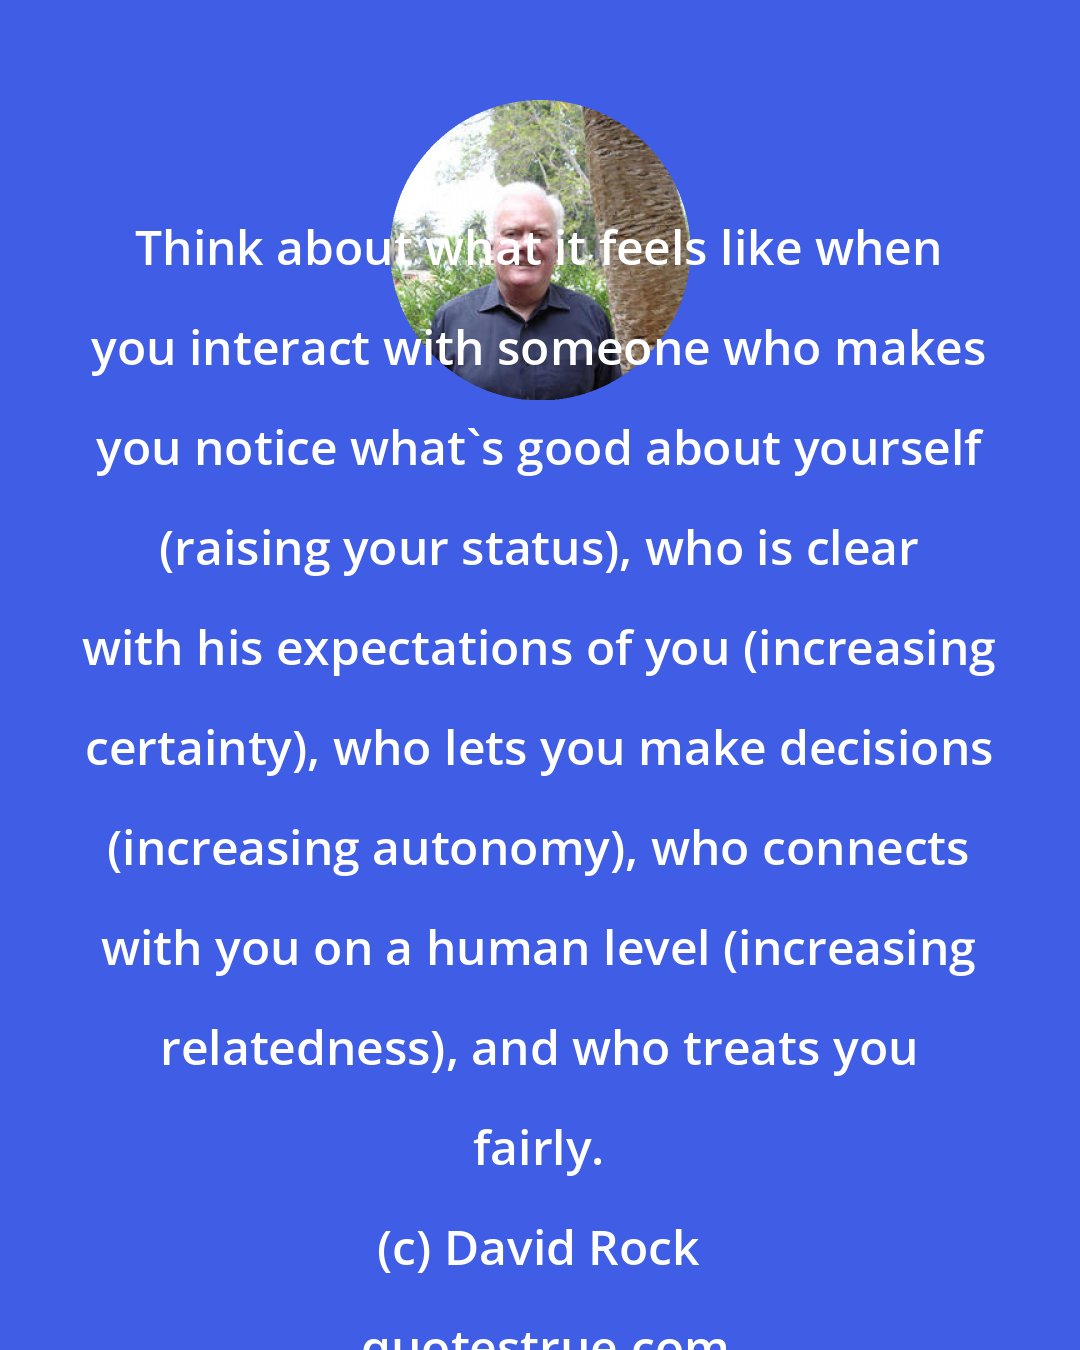 David Rock: Think about what it feels like when you interact with someone who makes you notice what's good about yourself (raising your status), who is clear with his expectations of you (increasing certainty), who lets you make decisions (increasing autonomy), who connects with you on a human level (increasing relatedness), and who treats you fairly.